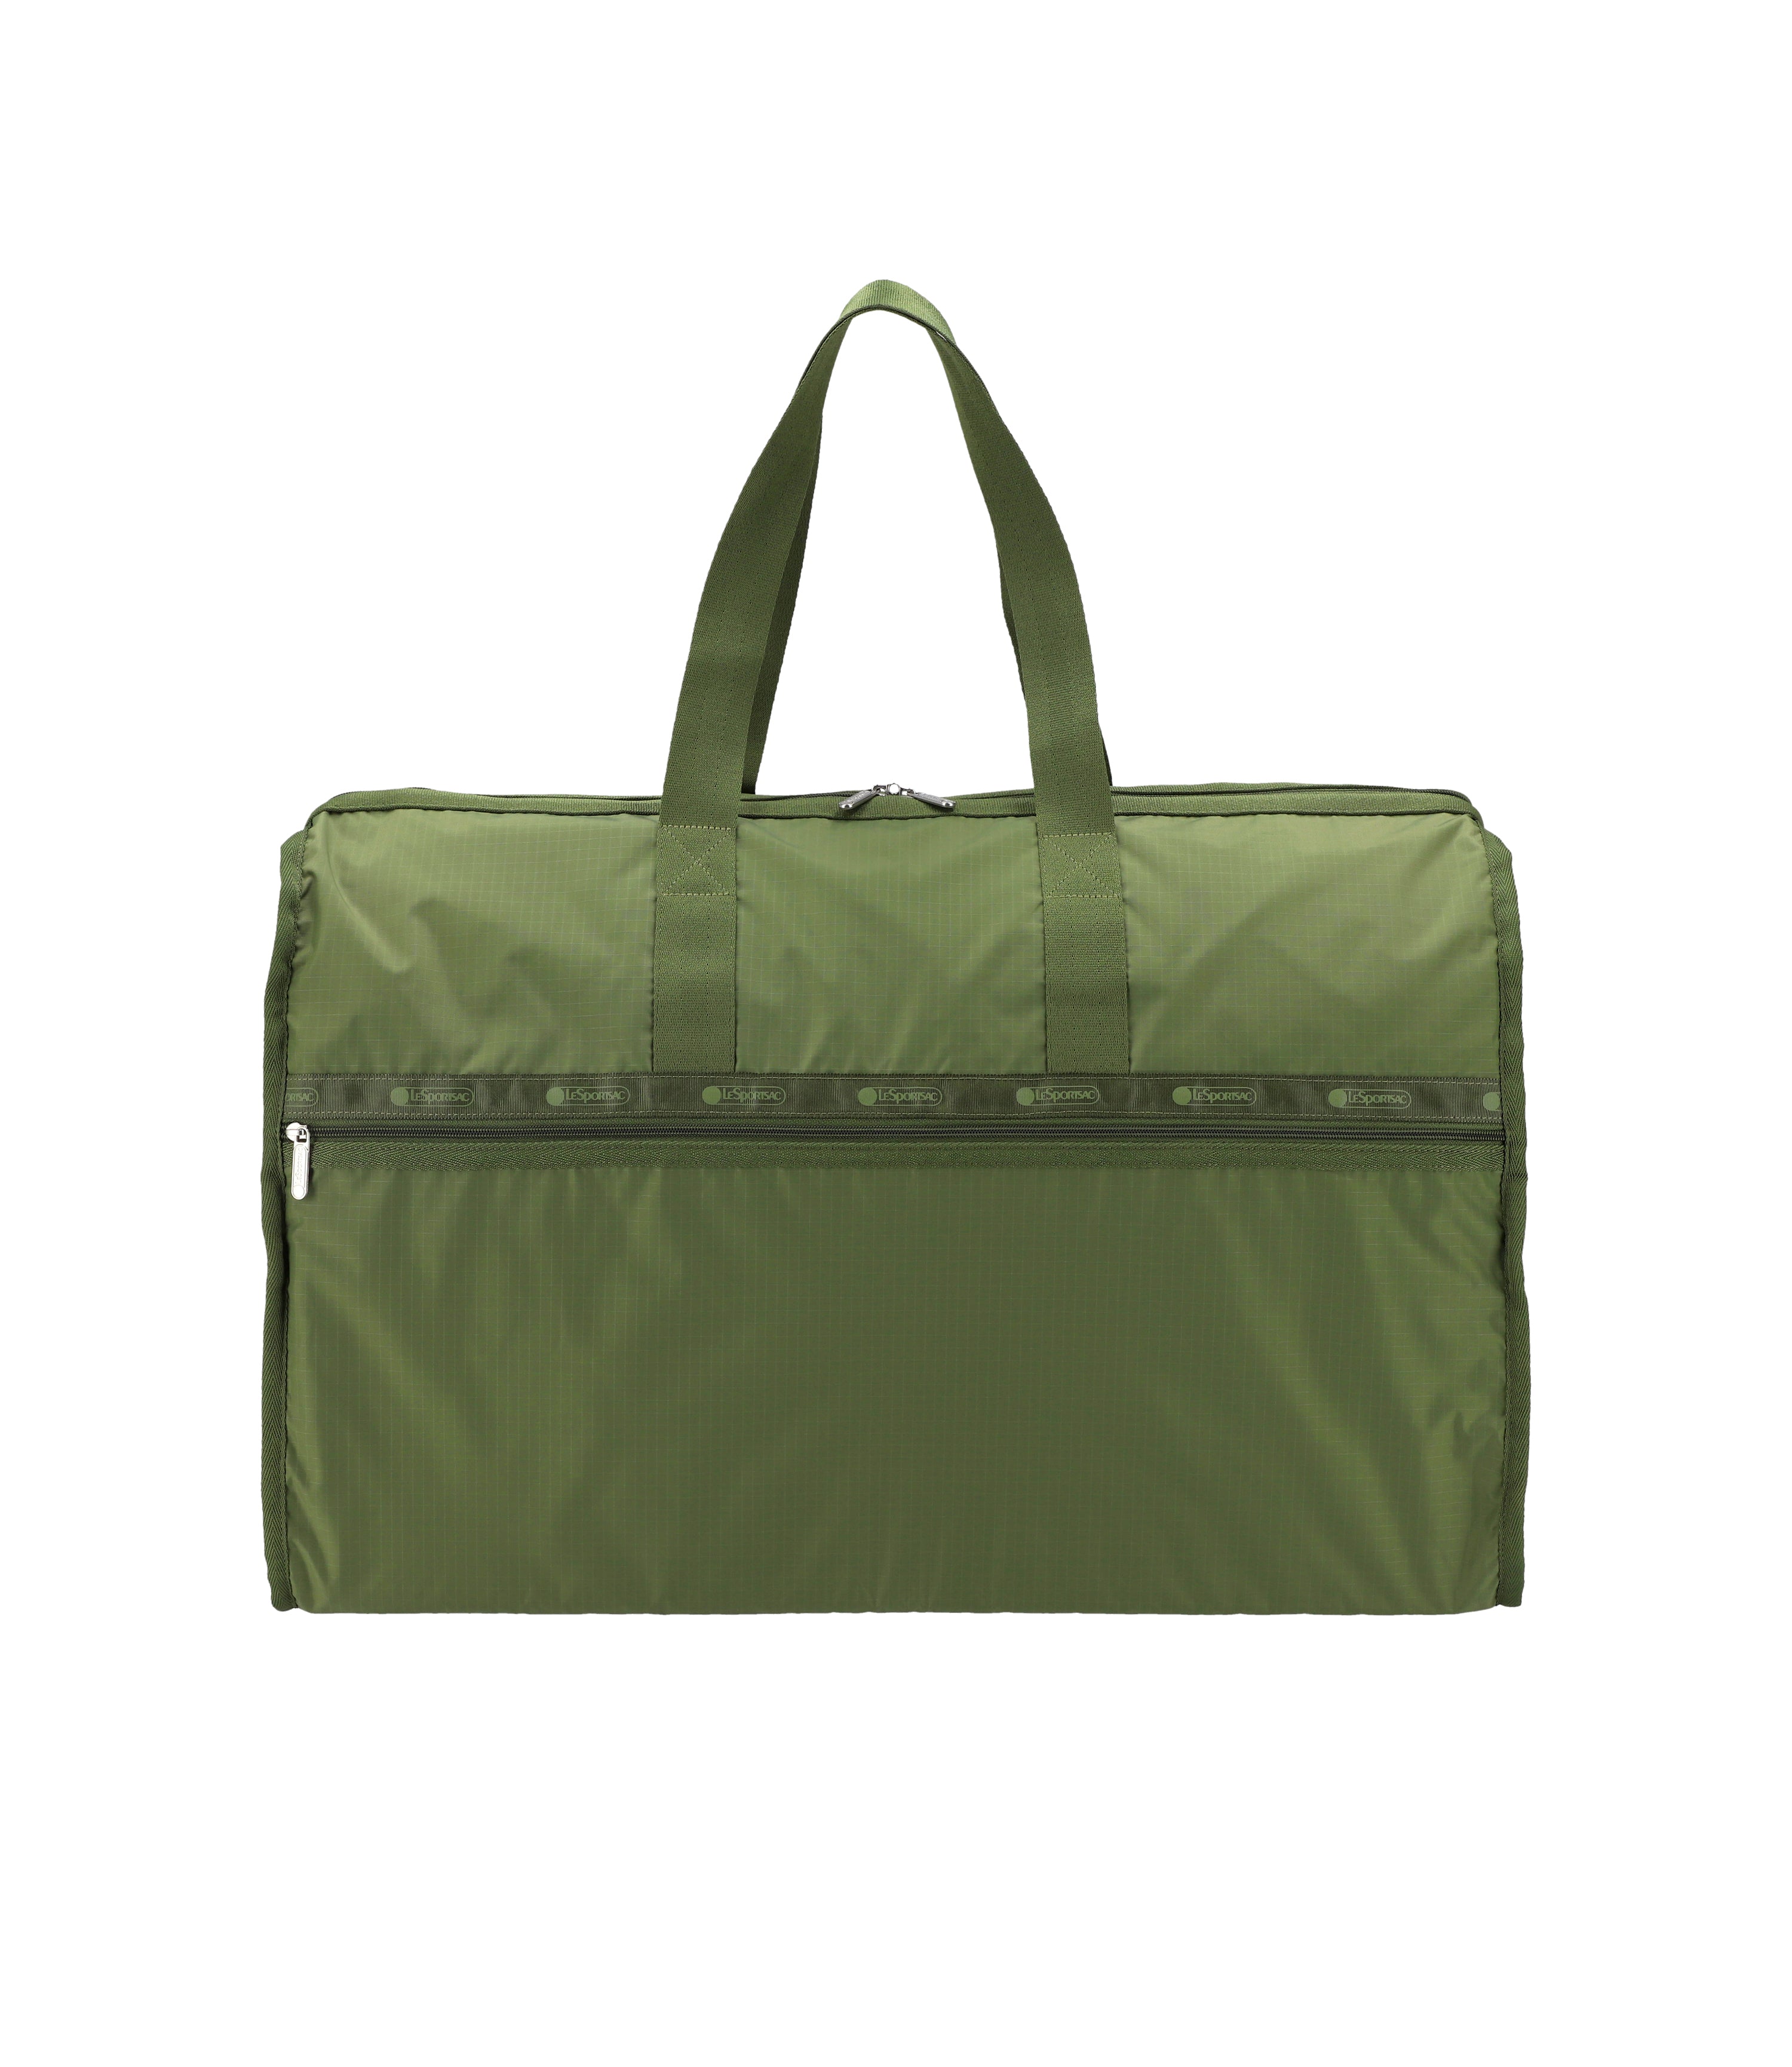 Deluxe Extra Large Weekender - Olive solid – LeSportsac